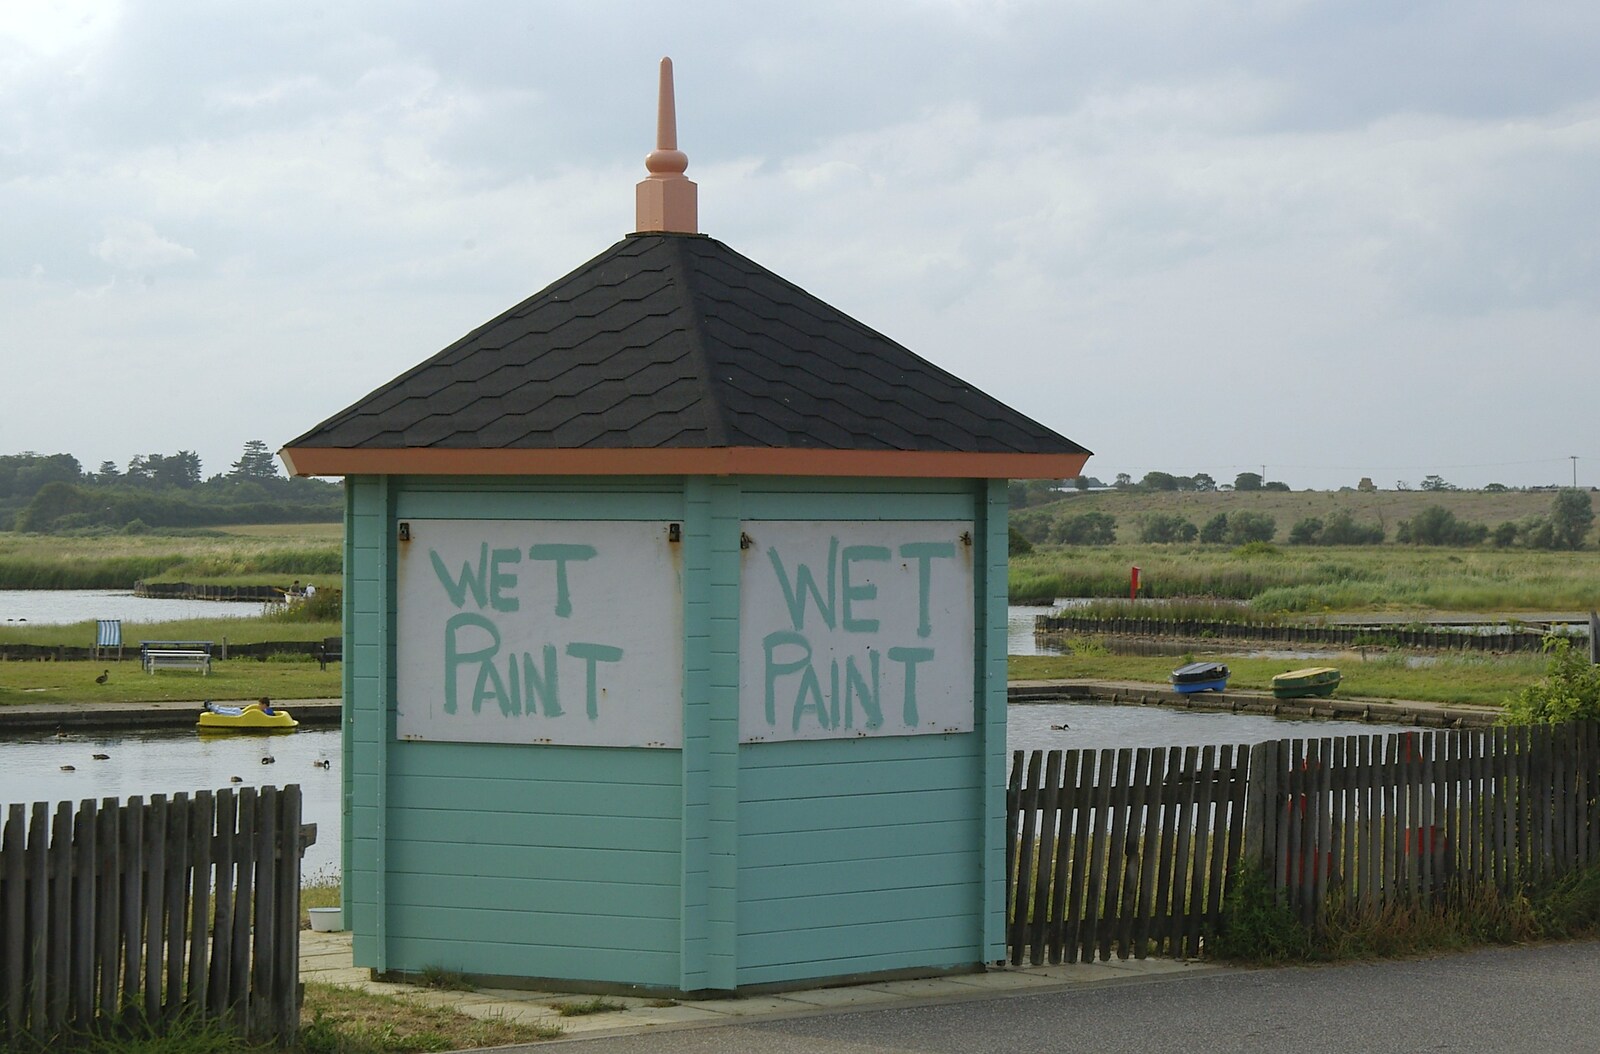 A Wet Paint hut down at Southwold from The BBs Play Yaxley Hall, Yaxley, Suffolk - 7th July 2006